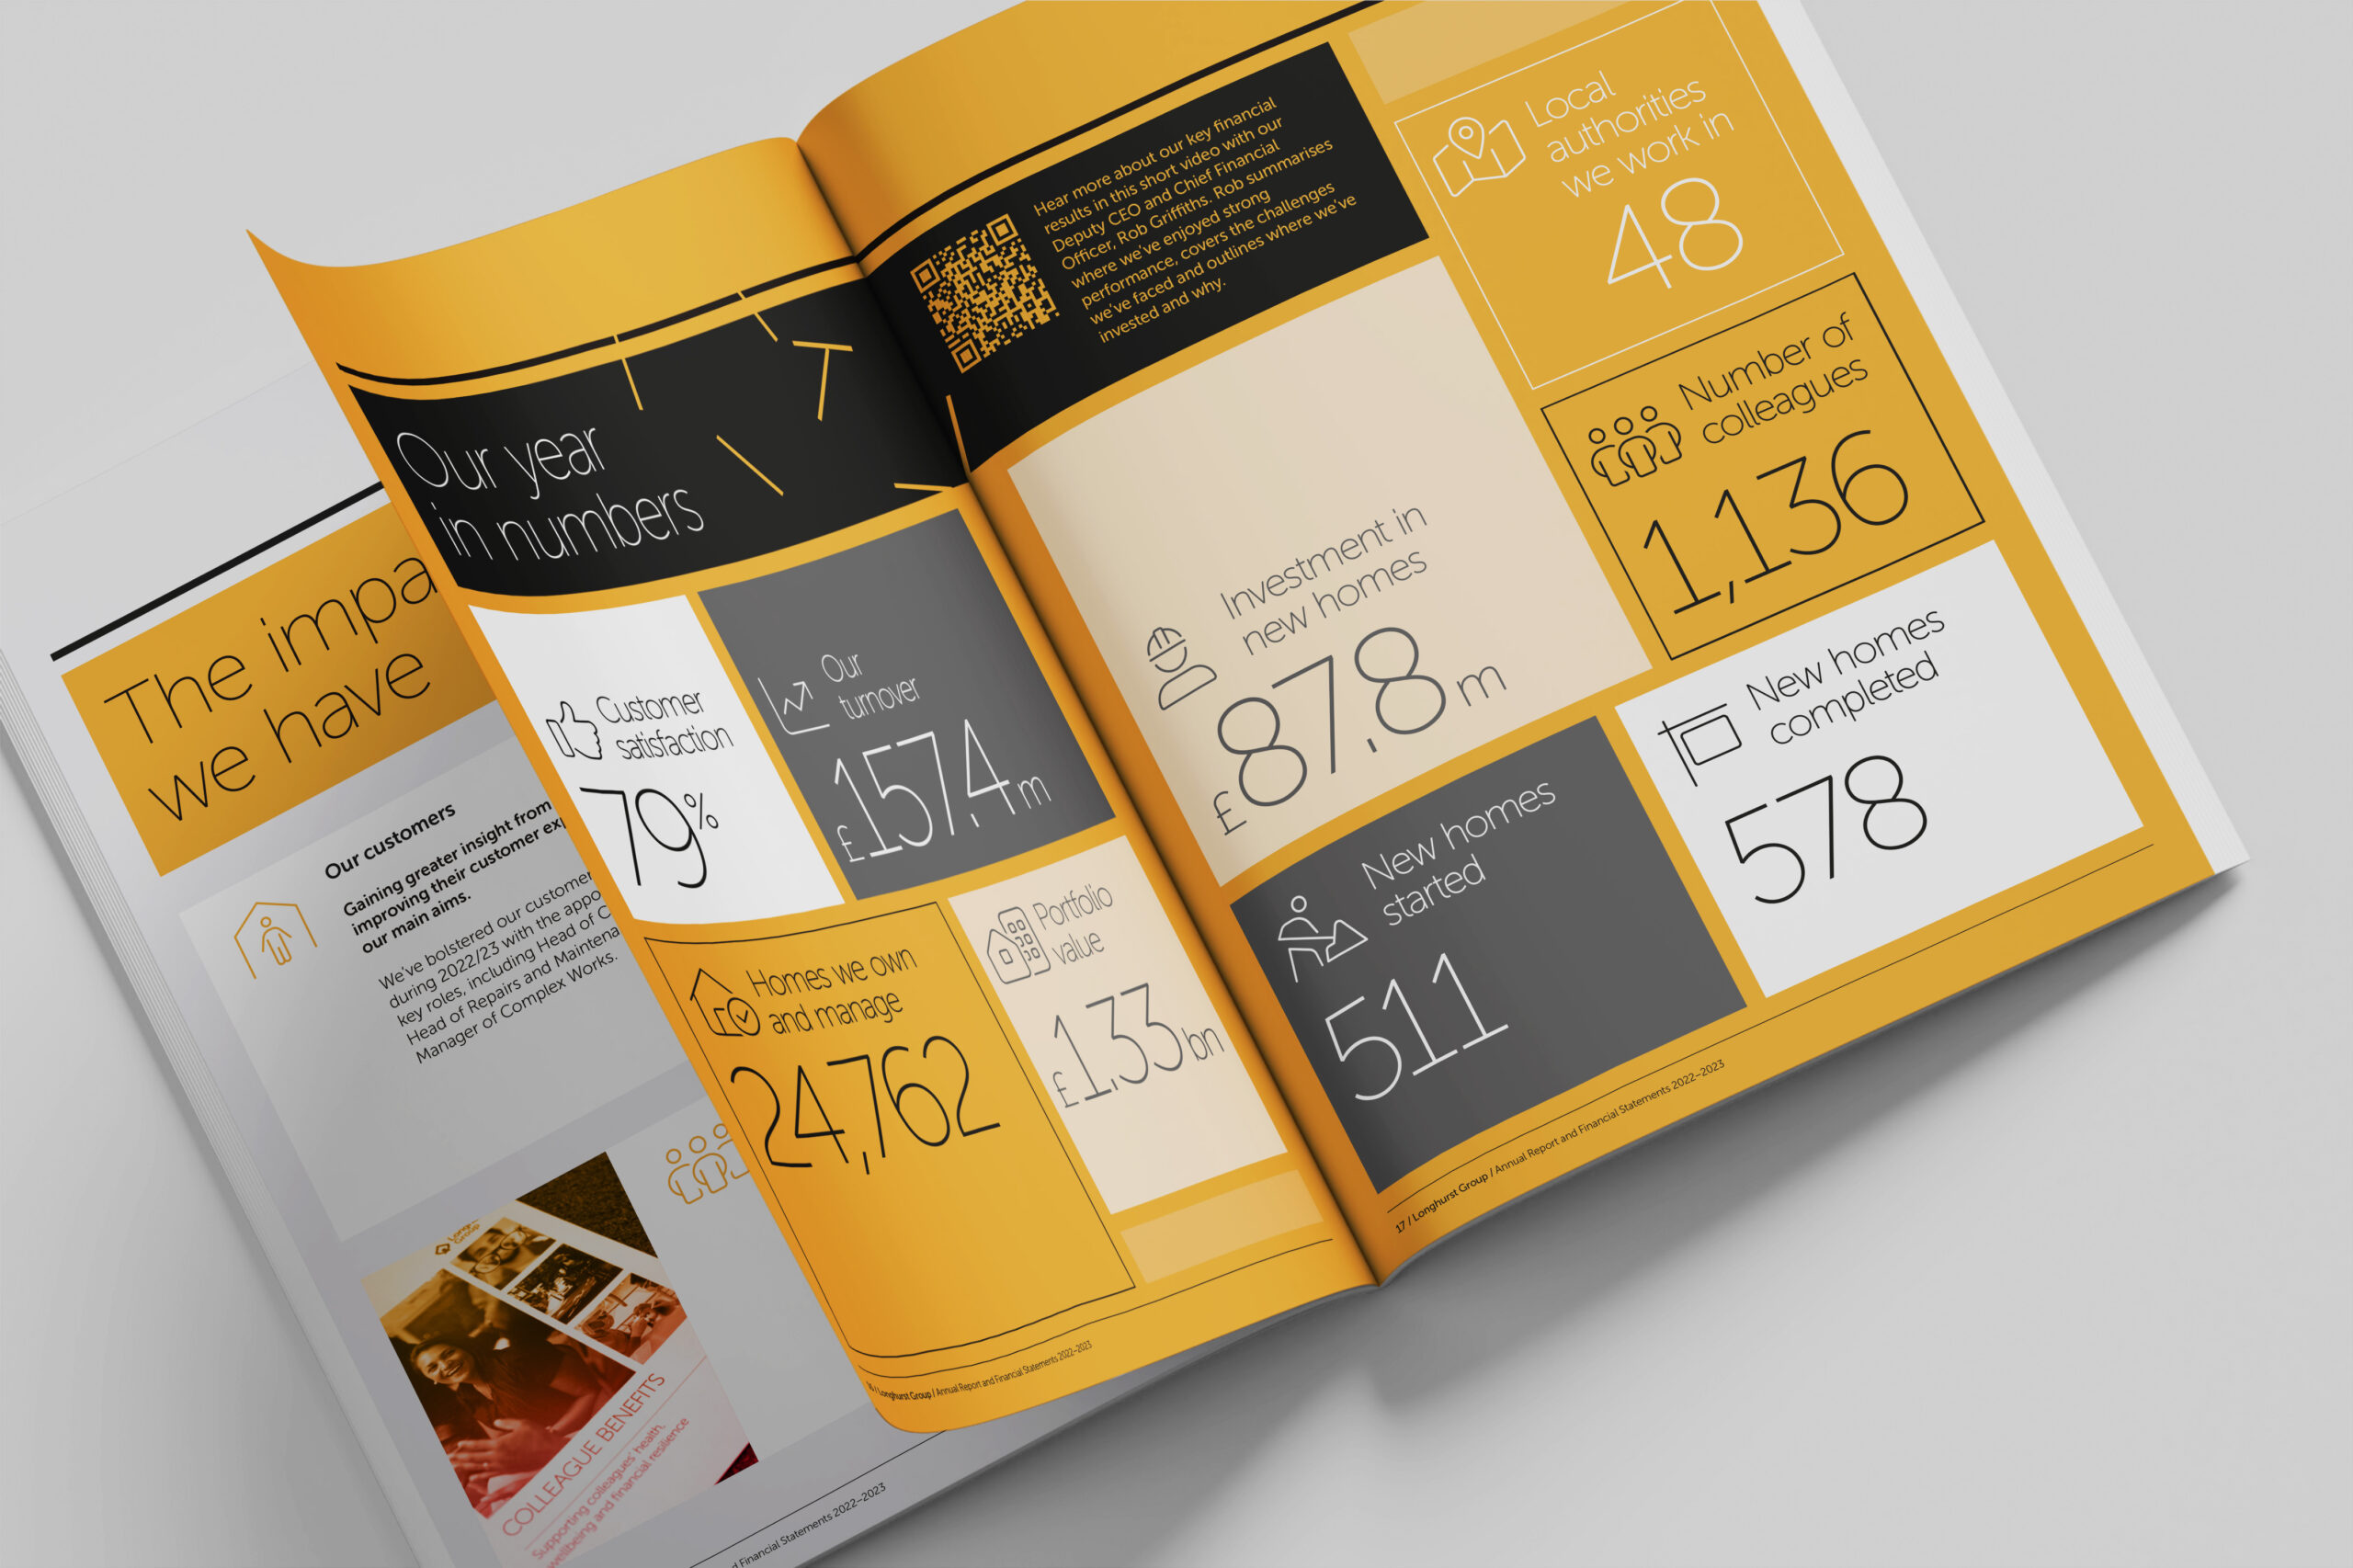 A double page spread from Longhurst Group's 2022/23 Annual Report showing headline figures from the year displayed in a grid in shades of golden yellow, grey and black